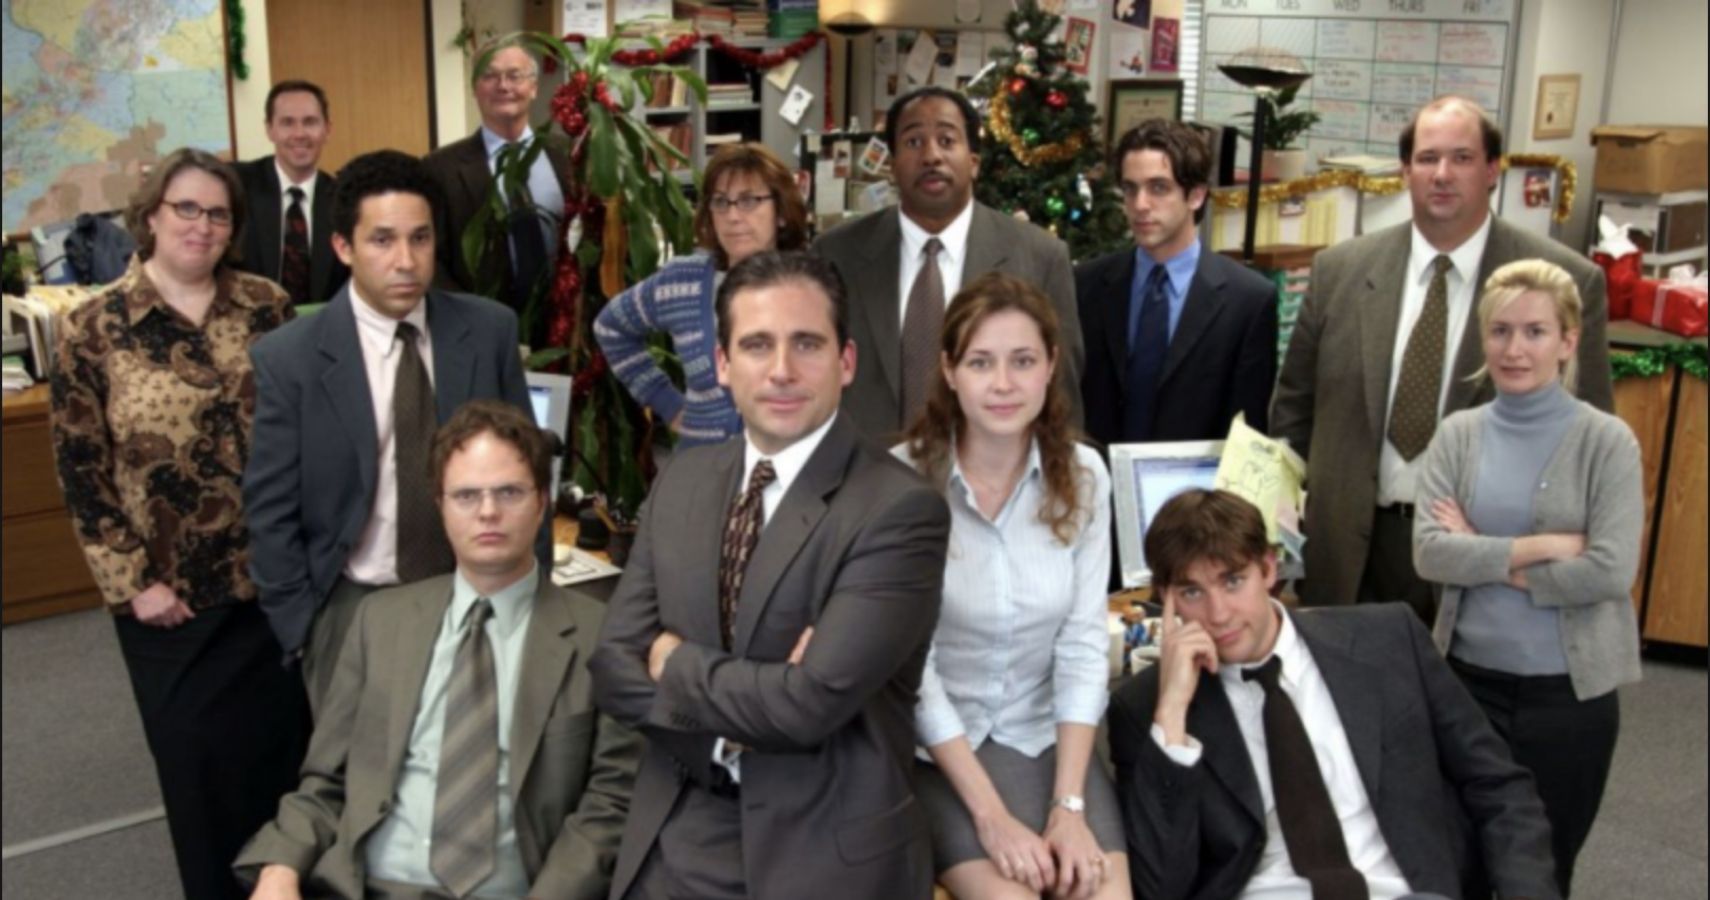 The Best Roles The Office Cast Had That Wasn’t The Office (According To